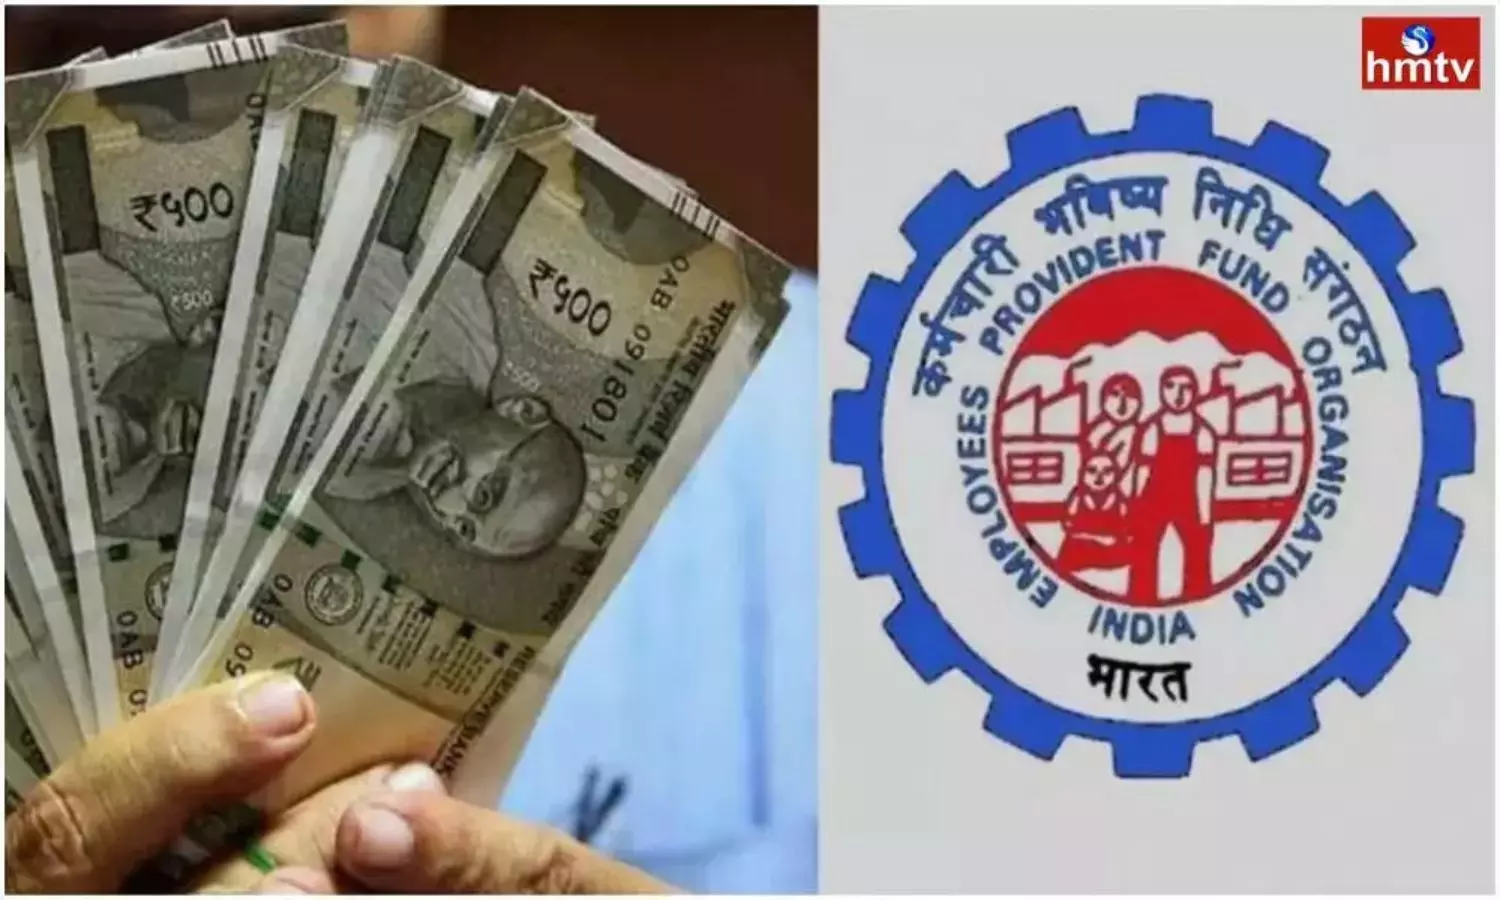 EPFO Members can get Additional Bonus up to 50 Thousand Rupees Know Full Details